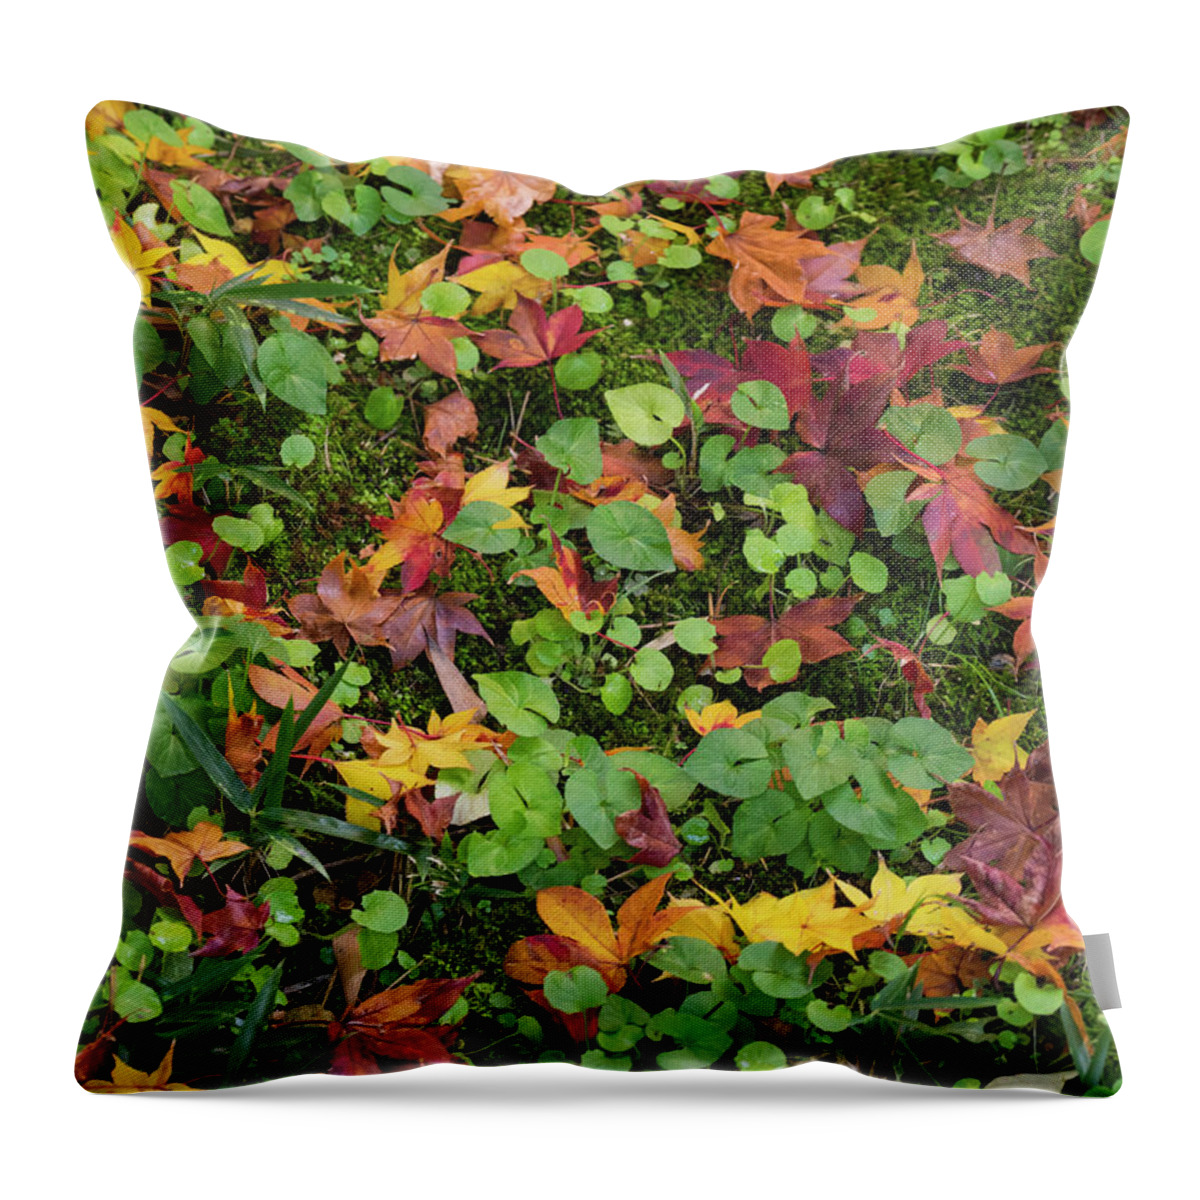 Photography Throw Pillow featuring the photograph Fallen Autumnal Leaves On Ground by Panoramic Images